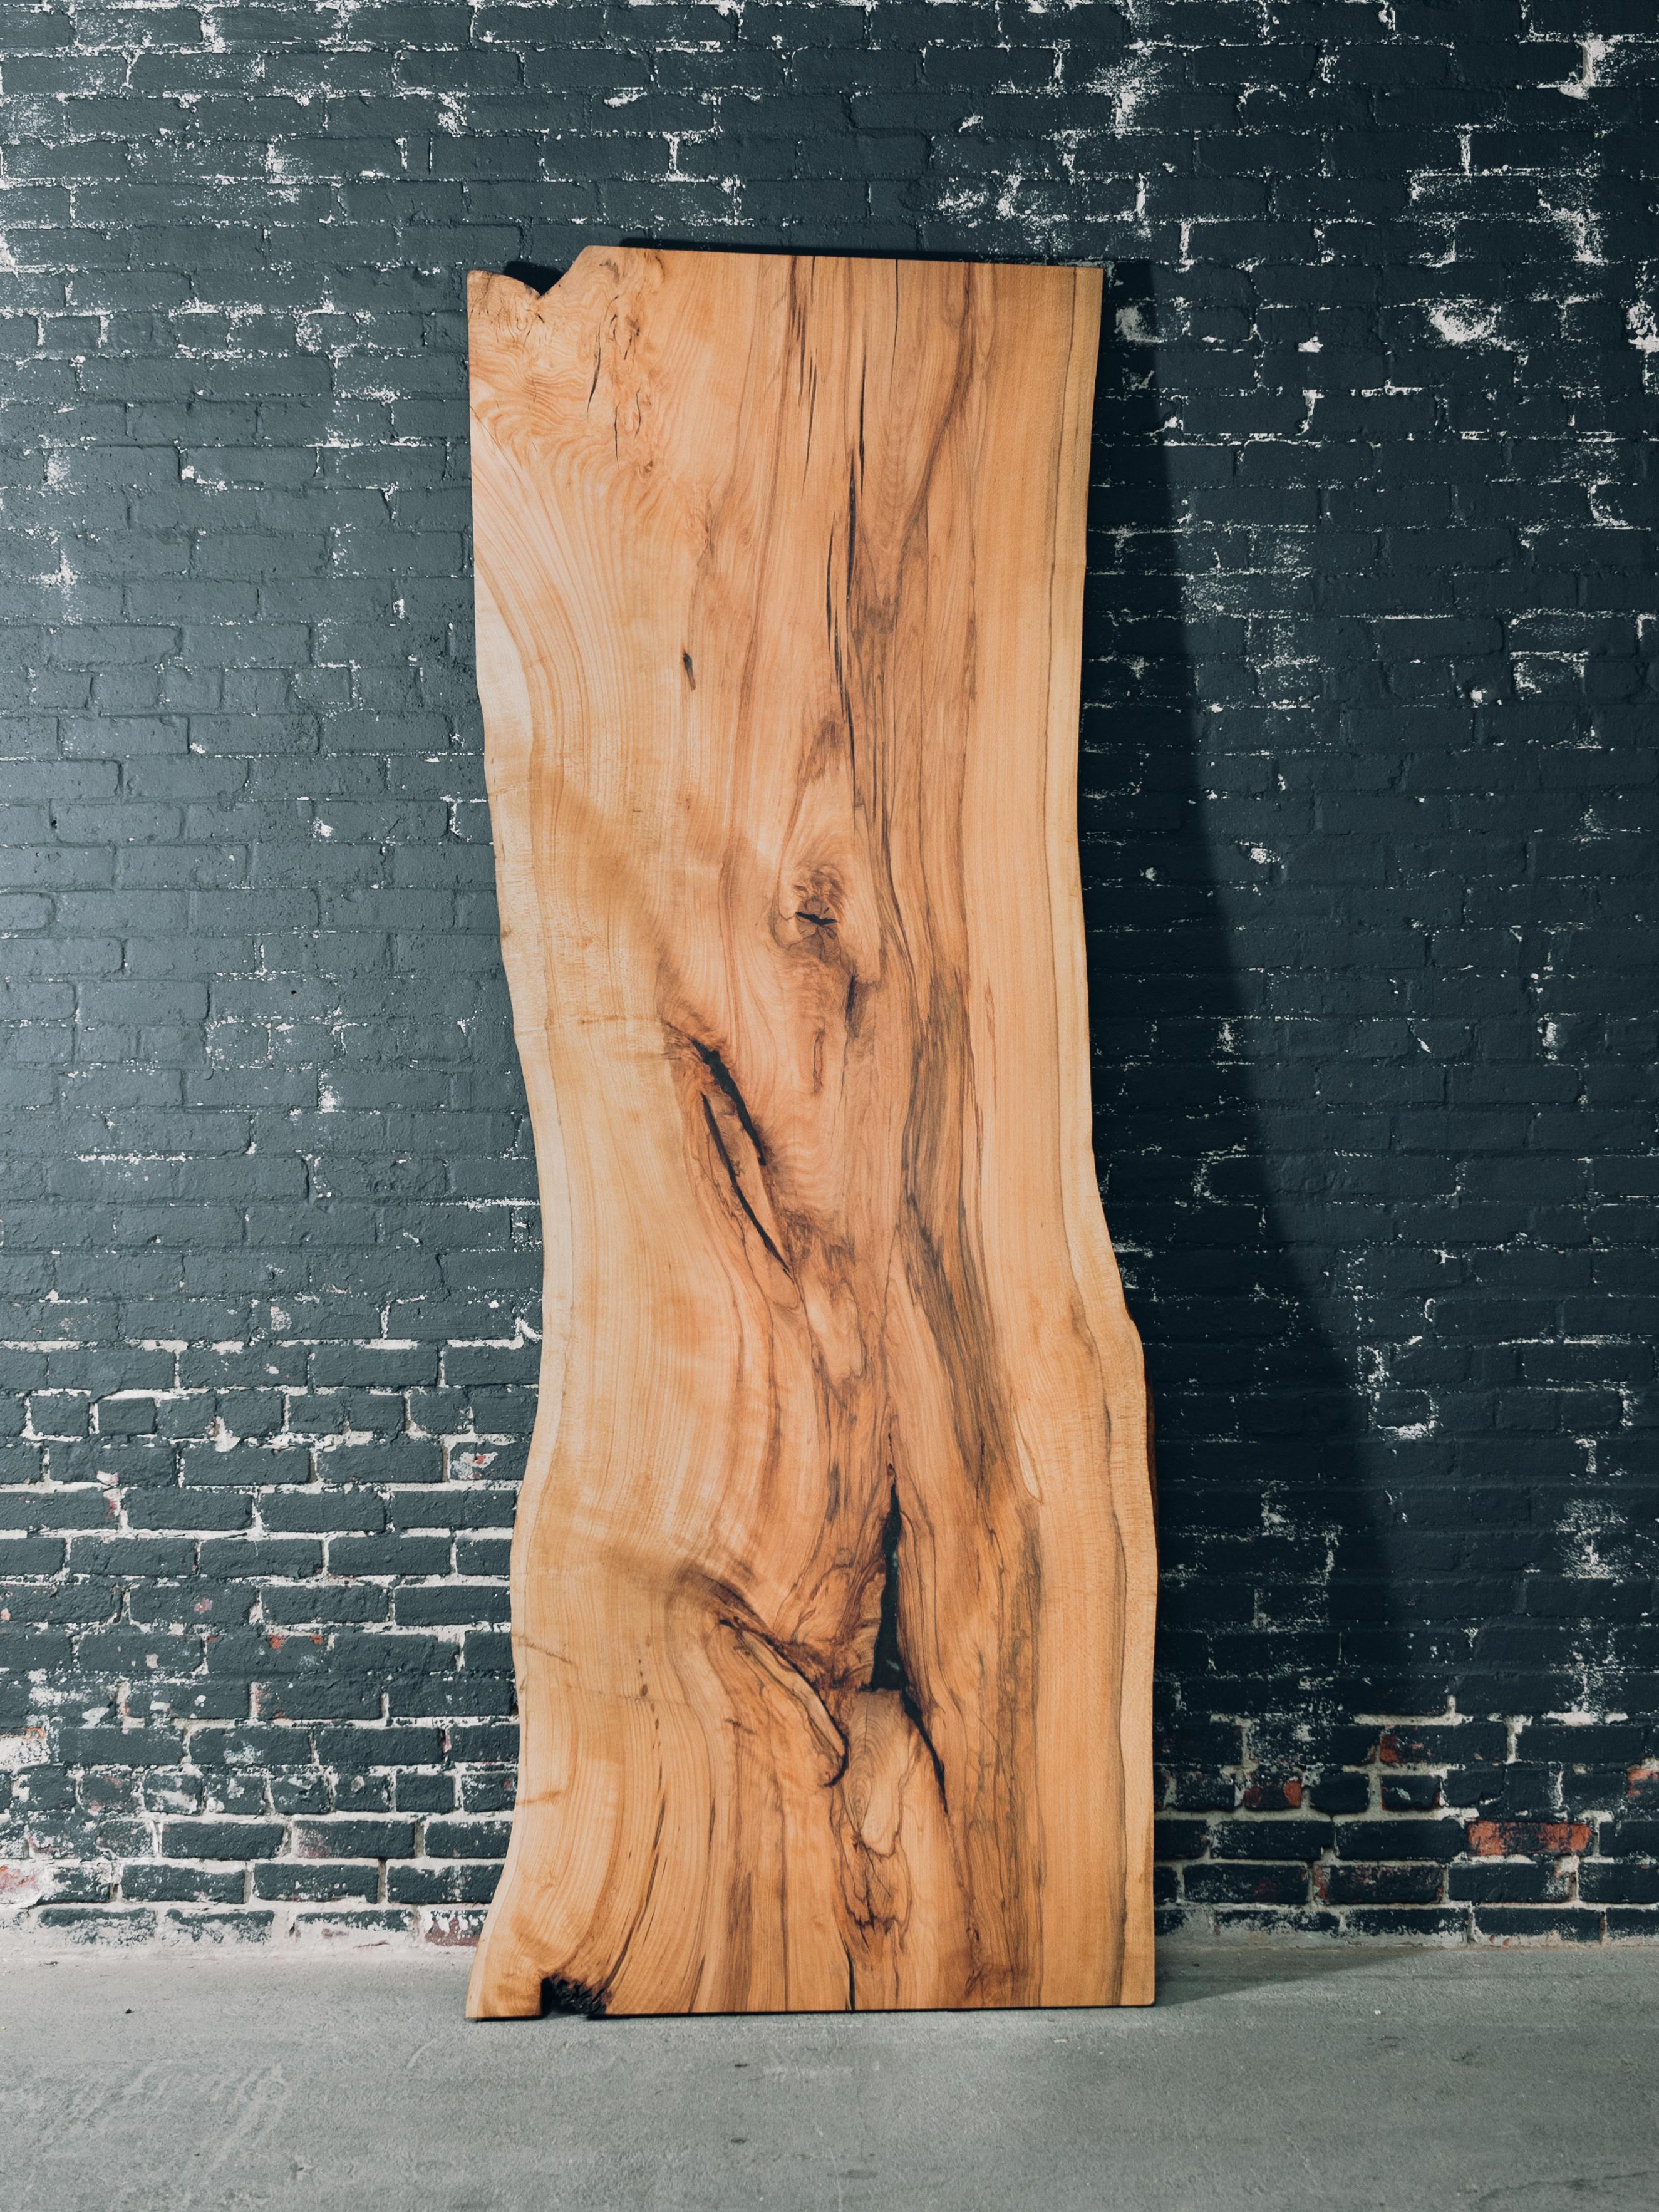 This slab came from a Beech tree that we personally milled on the property of John Adams Museum in Quincy MA. The slab features beautiful wood tones and figure that tell the story of the tree. The voids within the slab have been filled with an epoxy